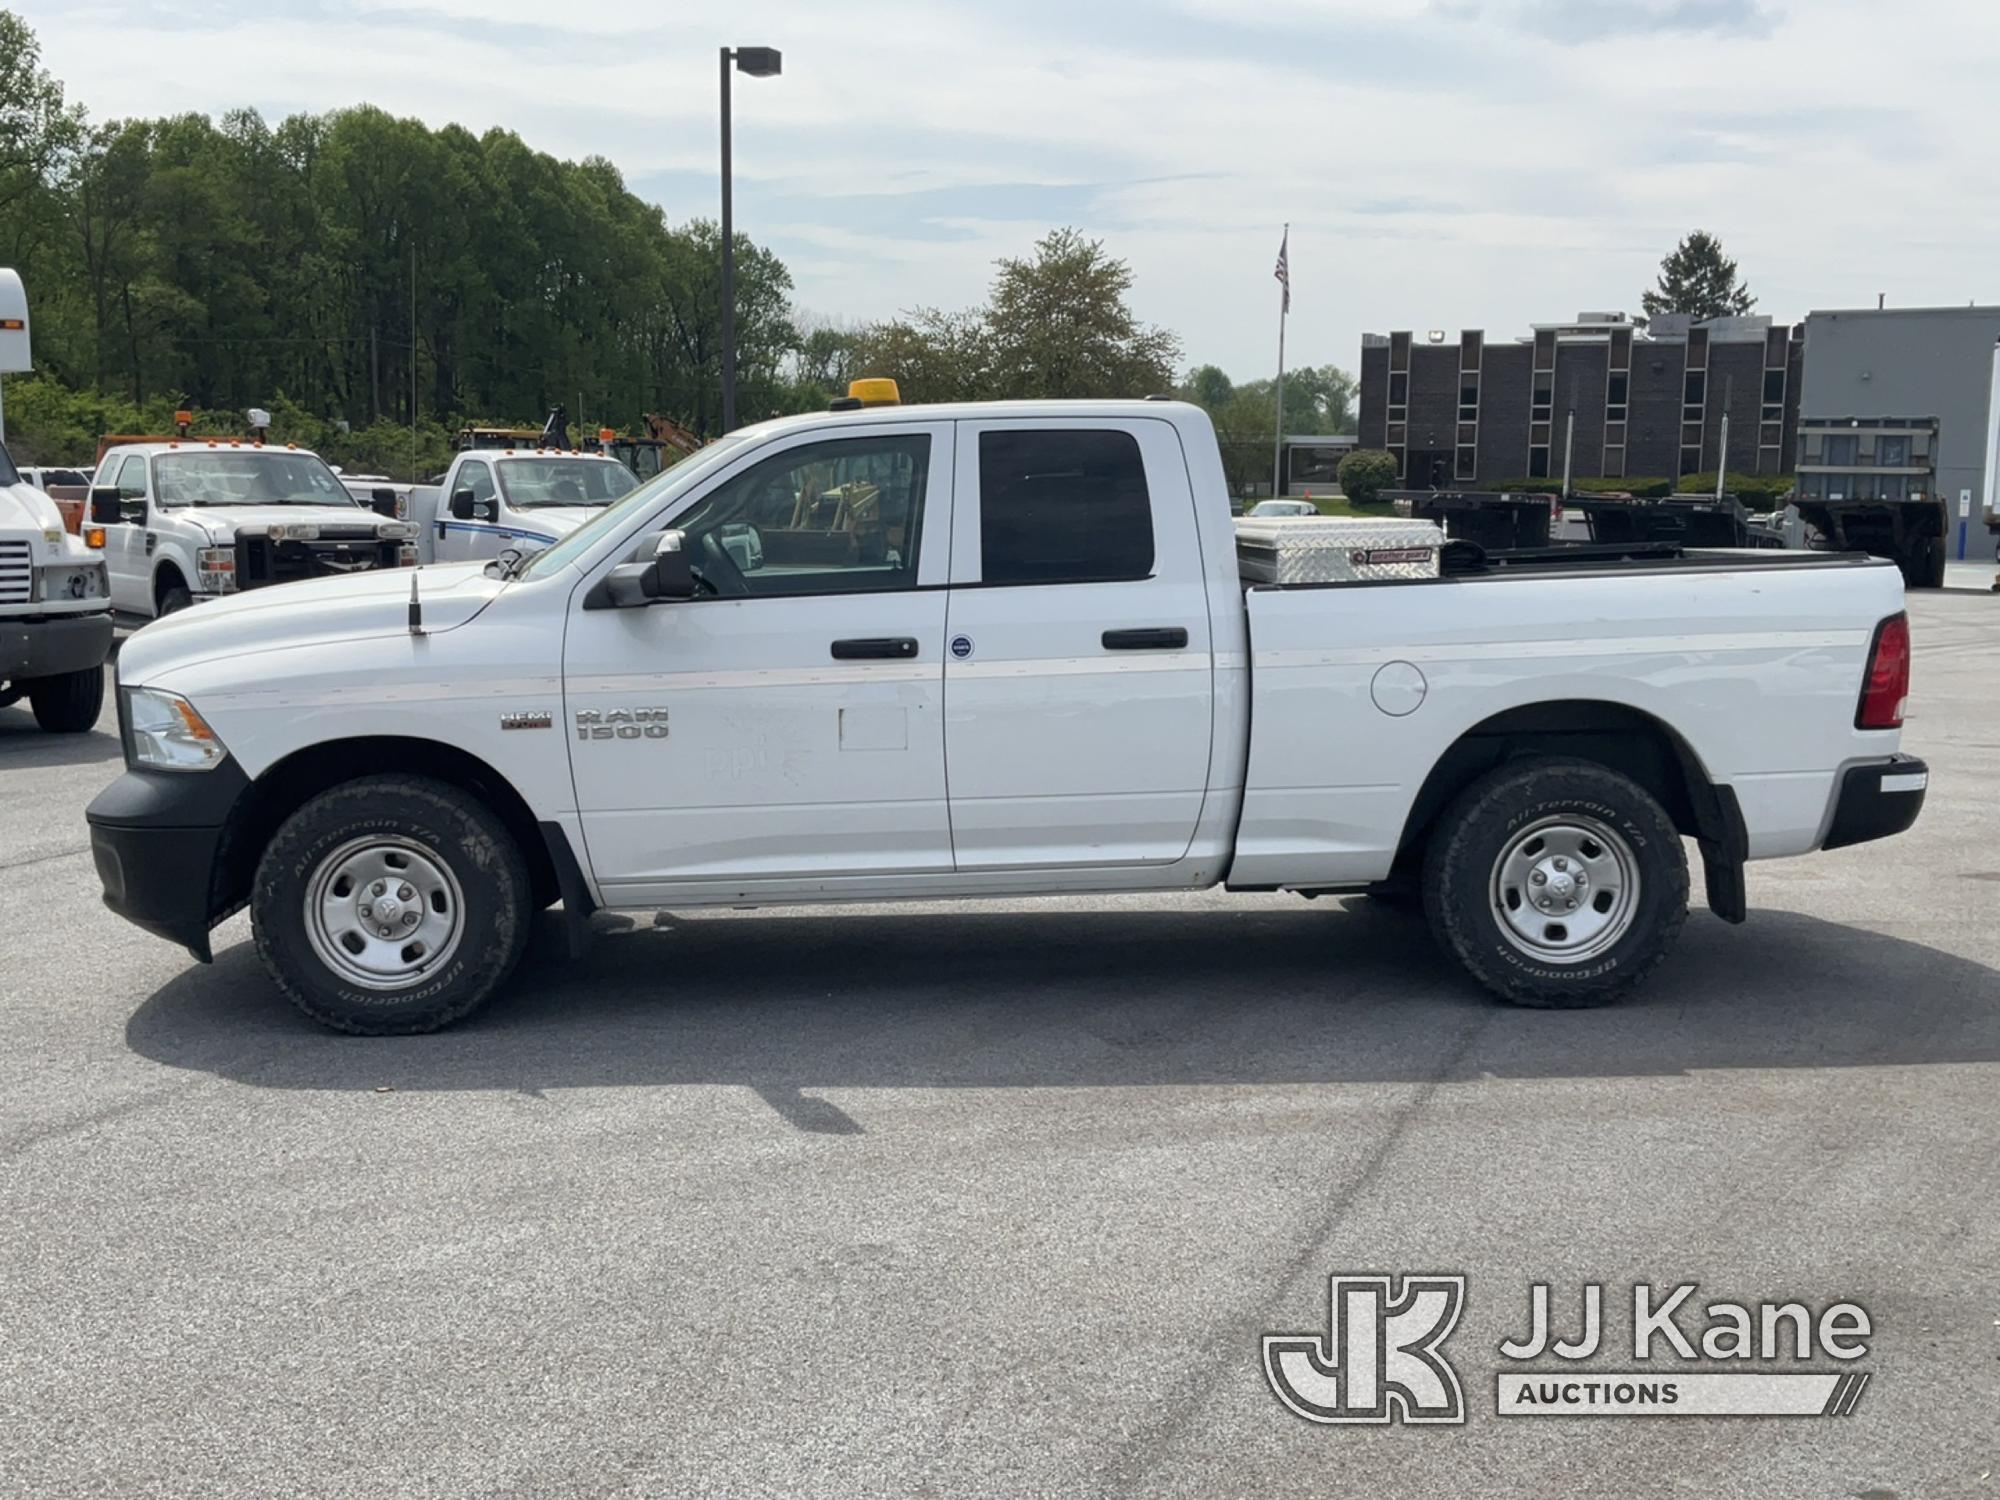 (Chester Springs, PA) 2015 RAM 1500 4x4 Extended-Cab Pickup Truck Runs & Moves, Body & Rust Damage)